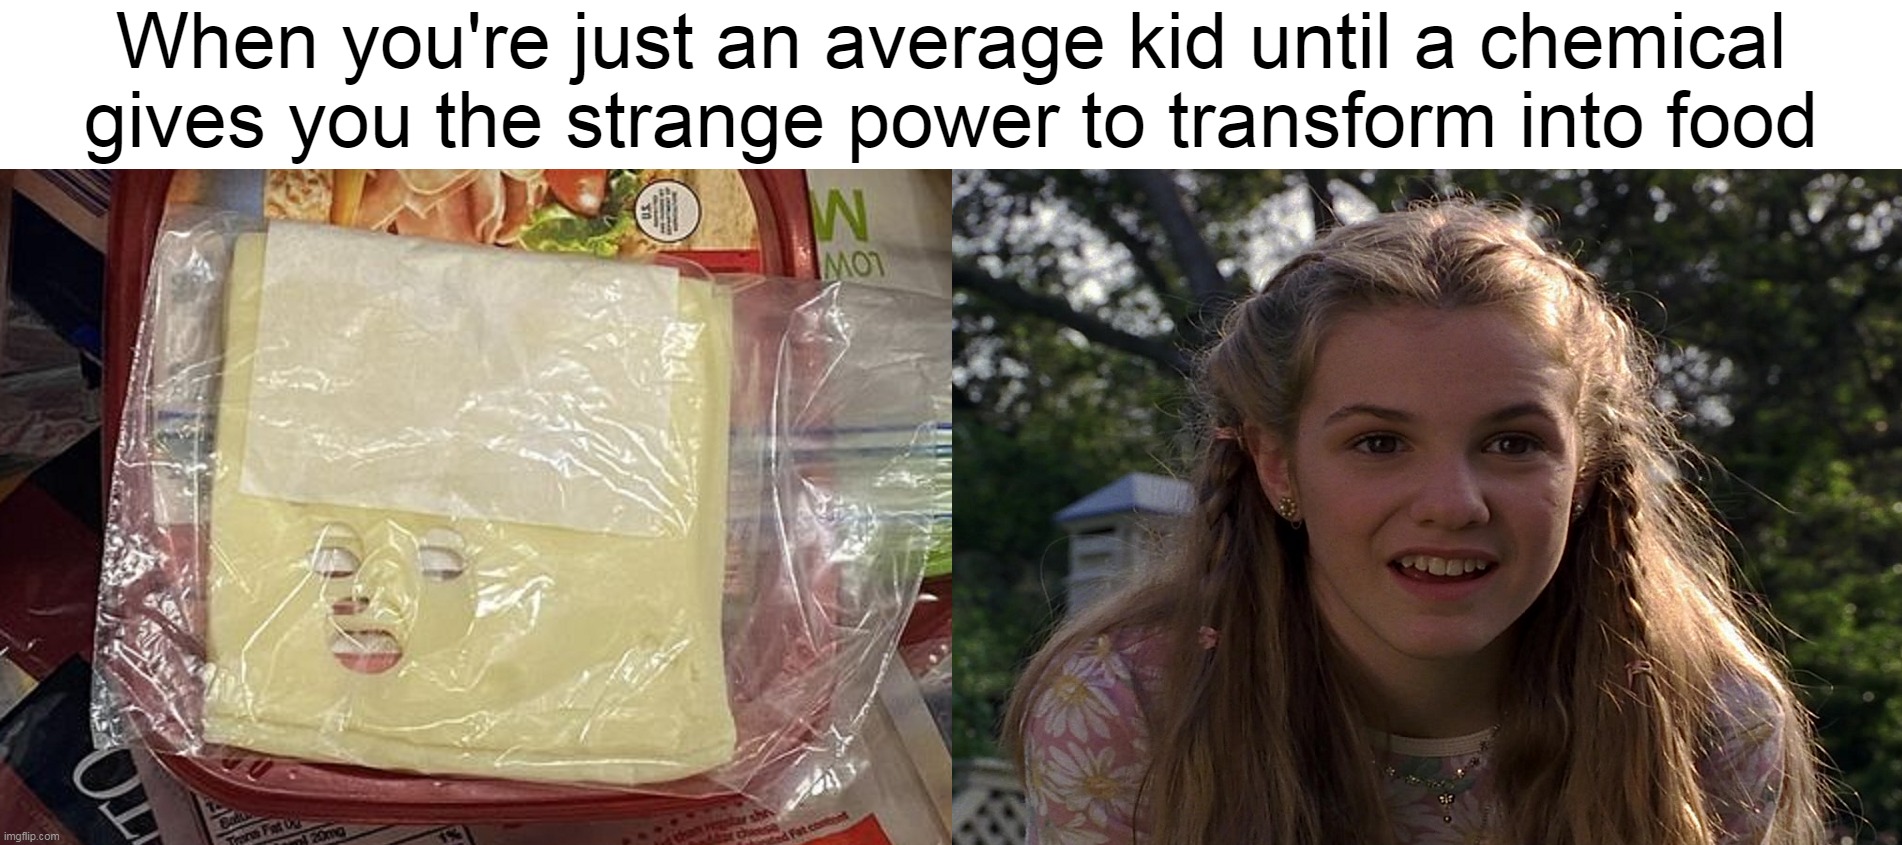 When you're just an average kid until a chemical gives you the strange power to transform into food | image tagged in meme,memes,funny,pareidolia | made w/ Imgflip meme maker